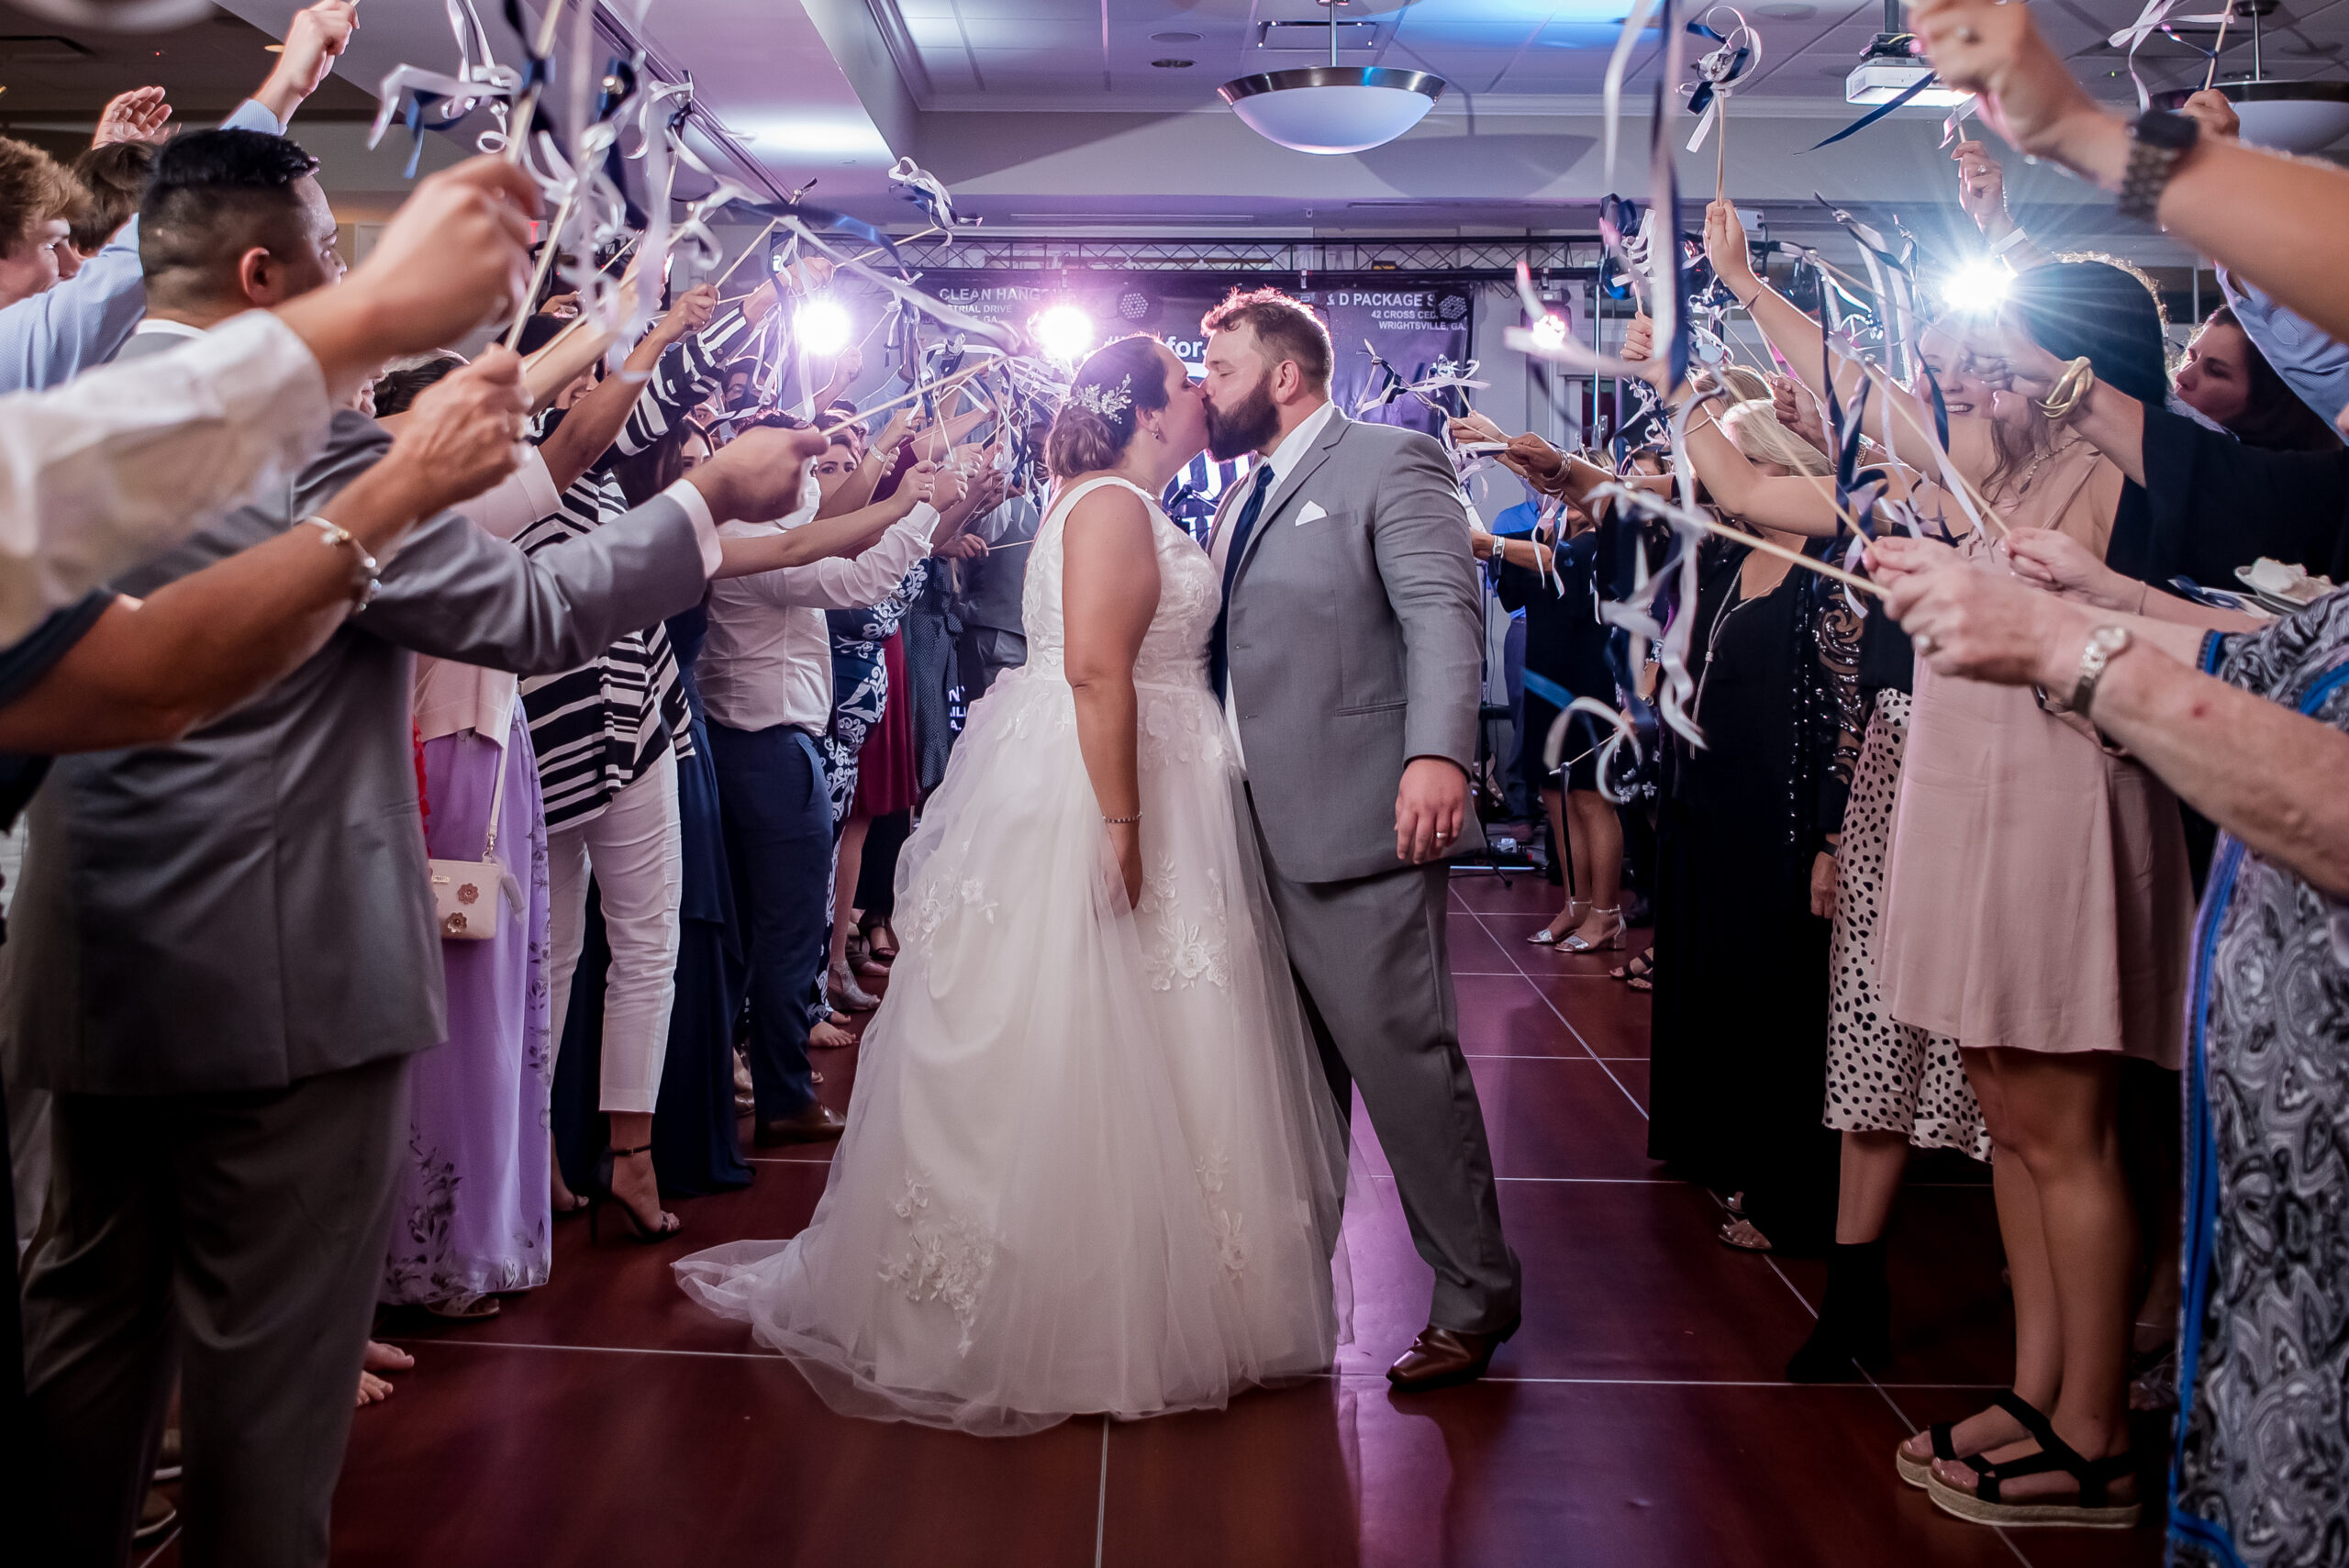 couple share a final kiss before exiting the wedding